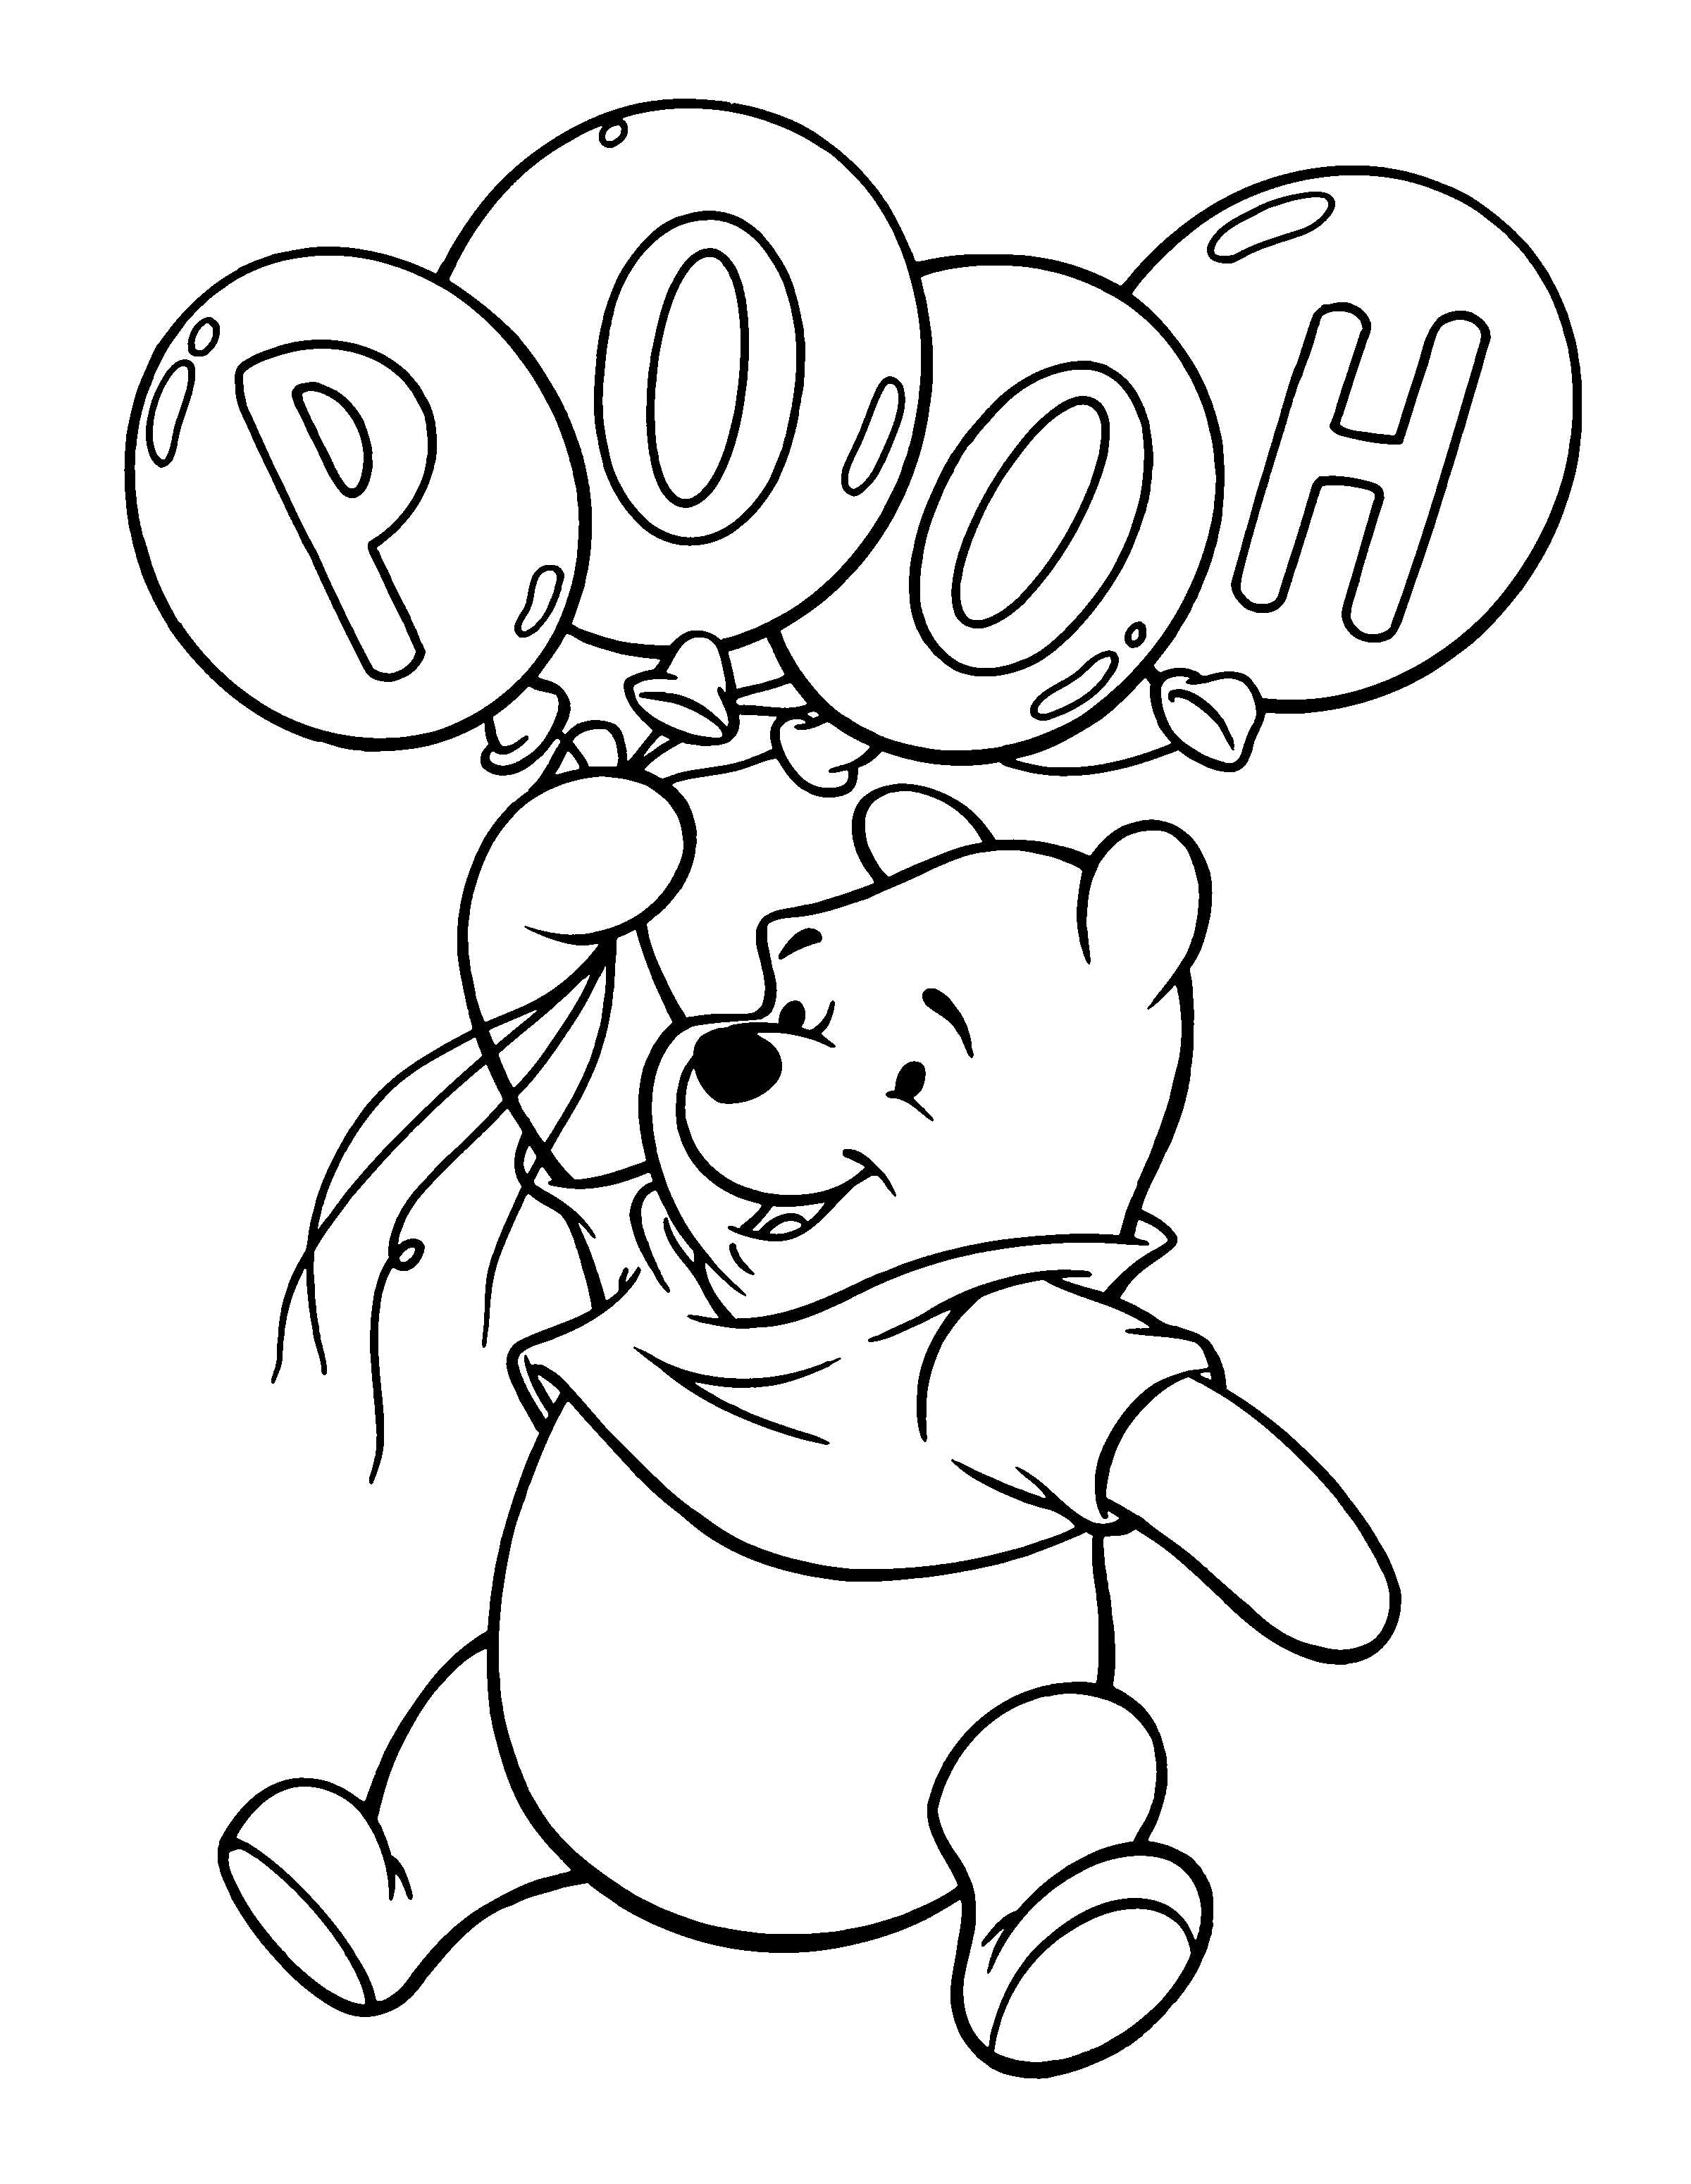 animated-coloring-pages-winnie-the-pooh-image-0097